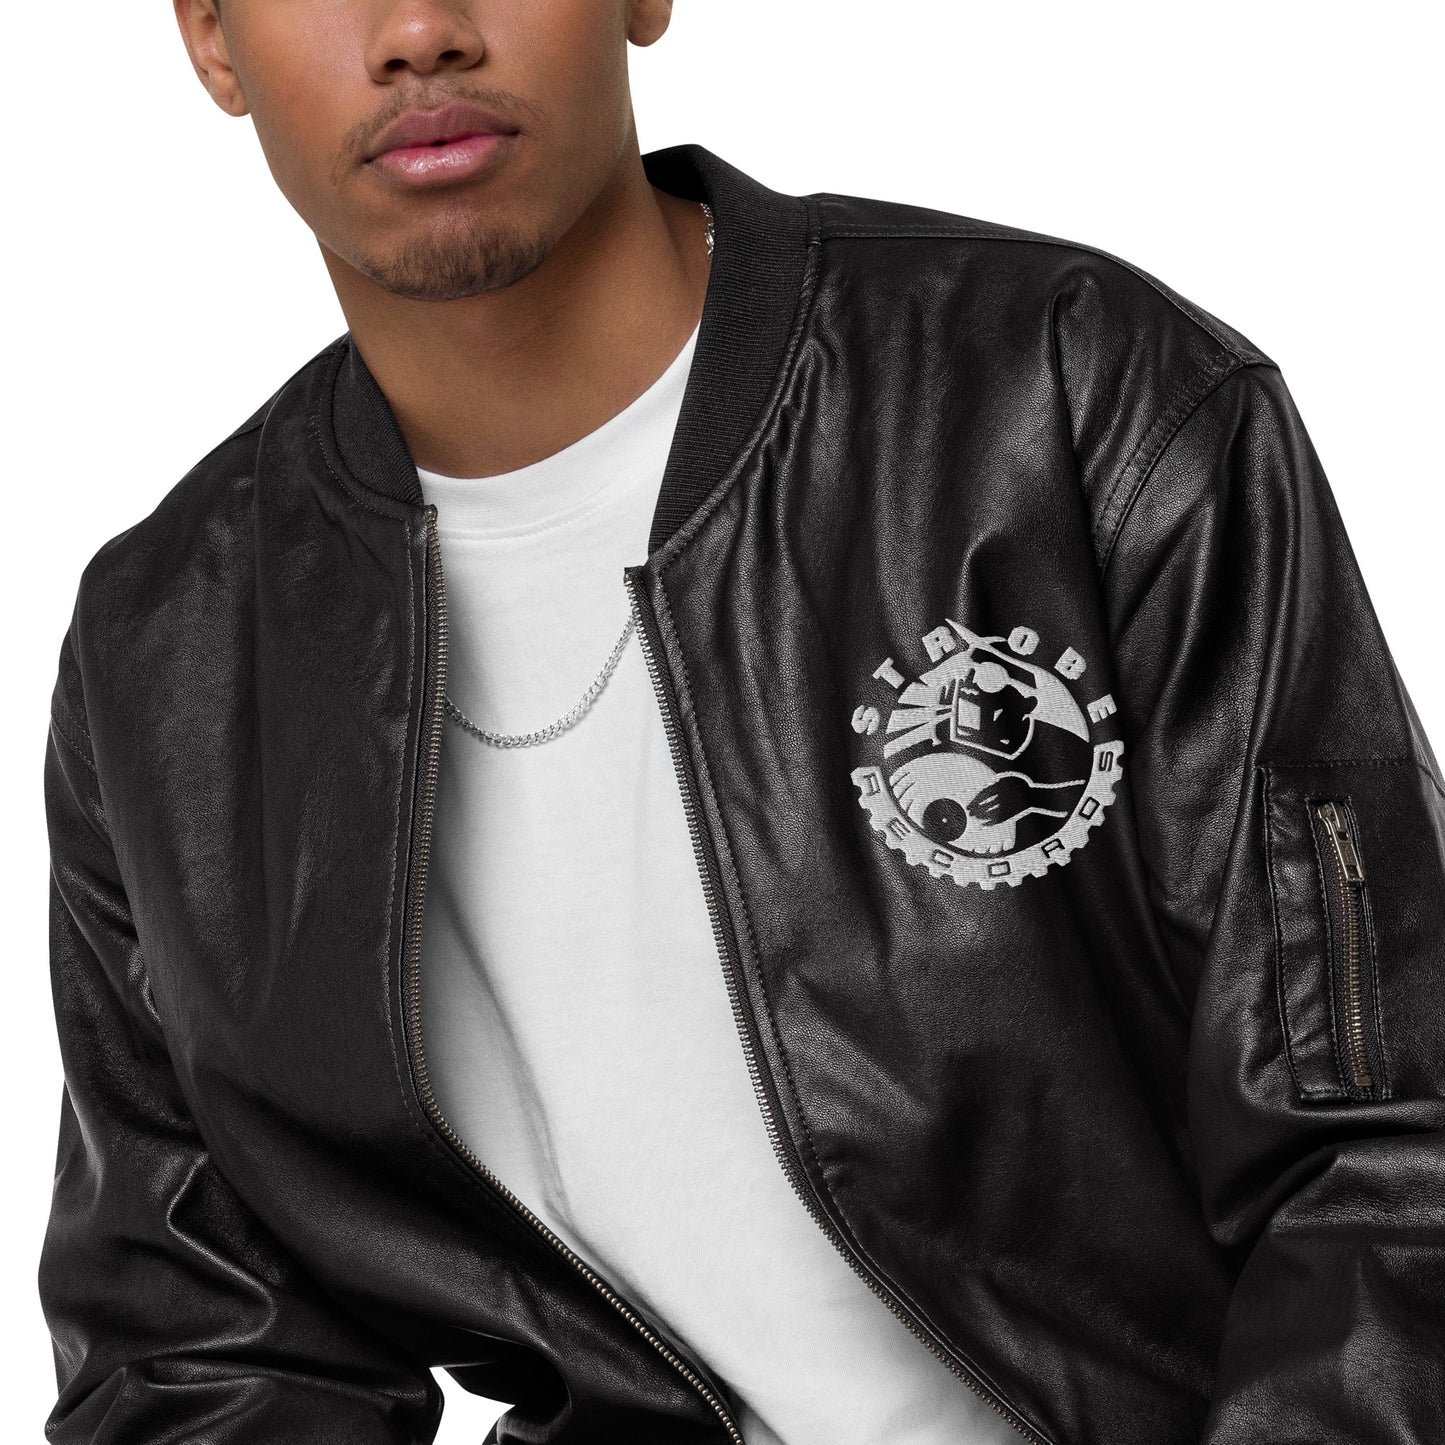 Strobe Records Embroidered MCMXCI Faux Leather Bomber Jacket